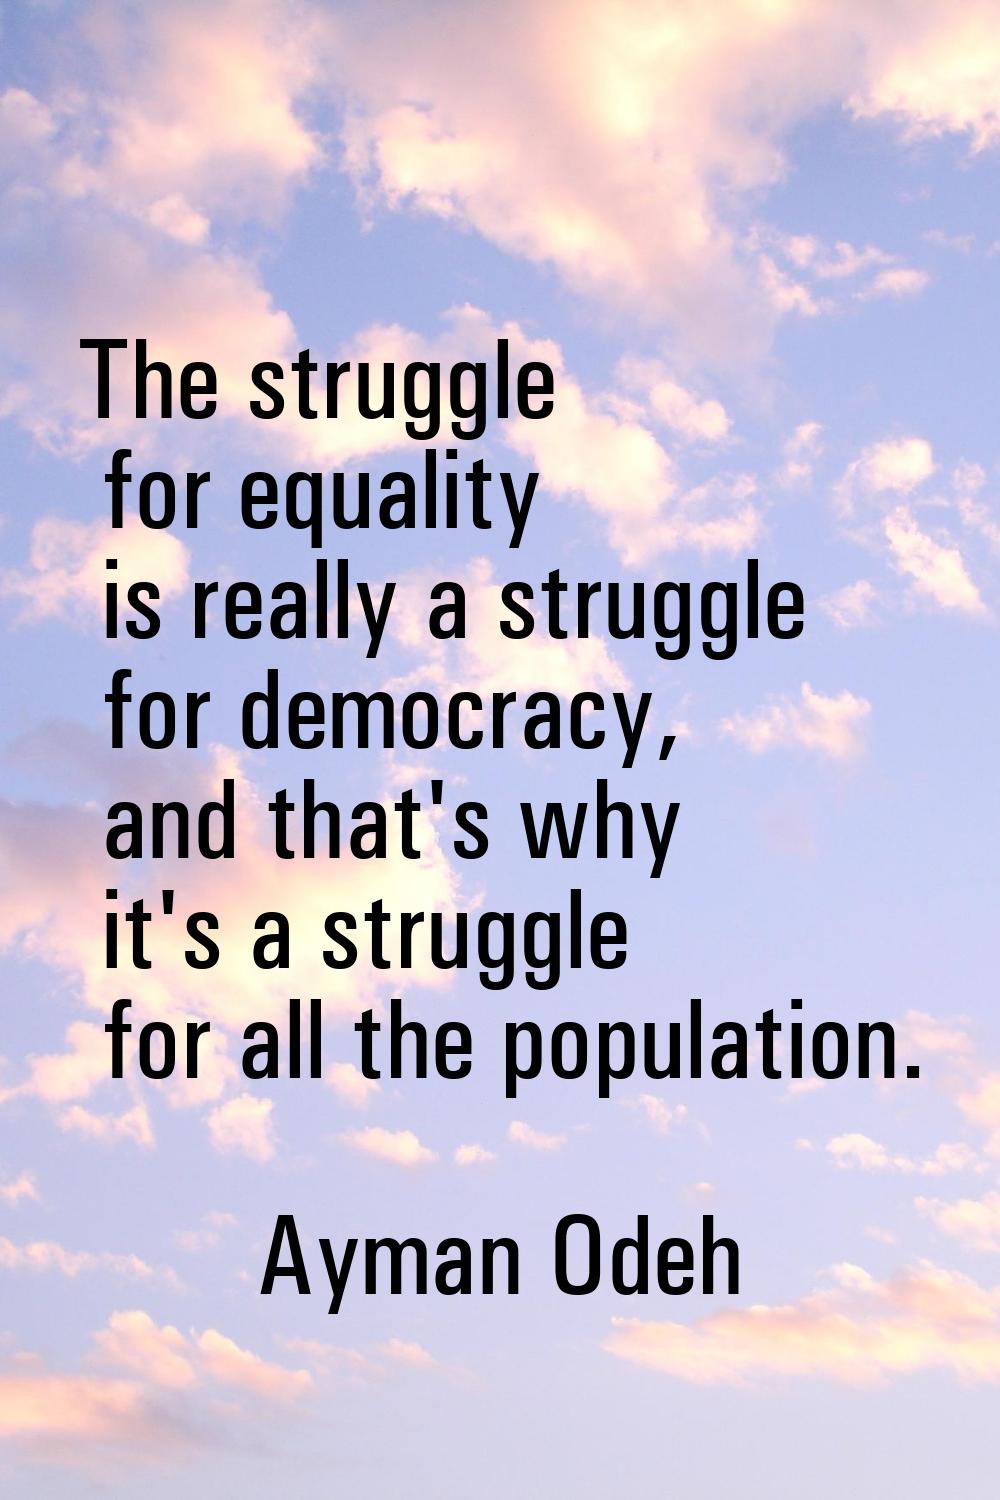 The struggle for equality is really a struggle for democracy, and that's why it's a struggle for al